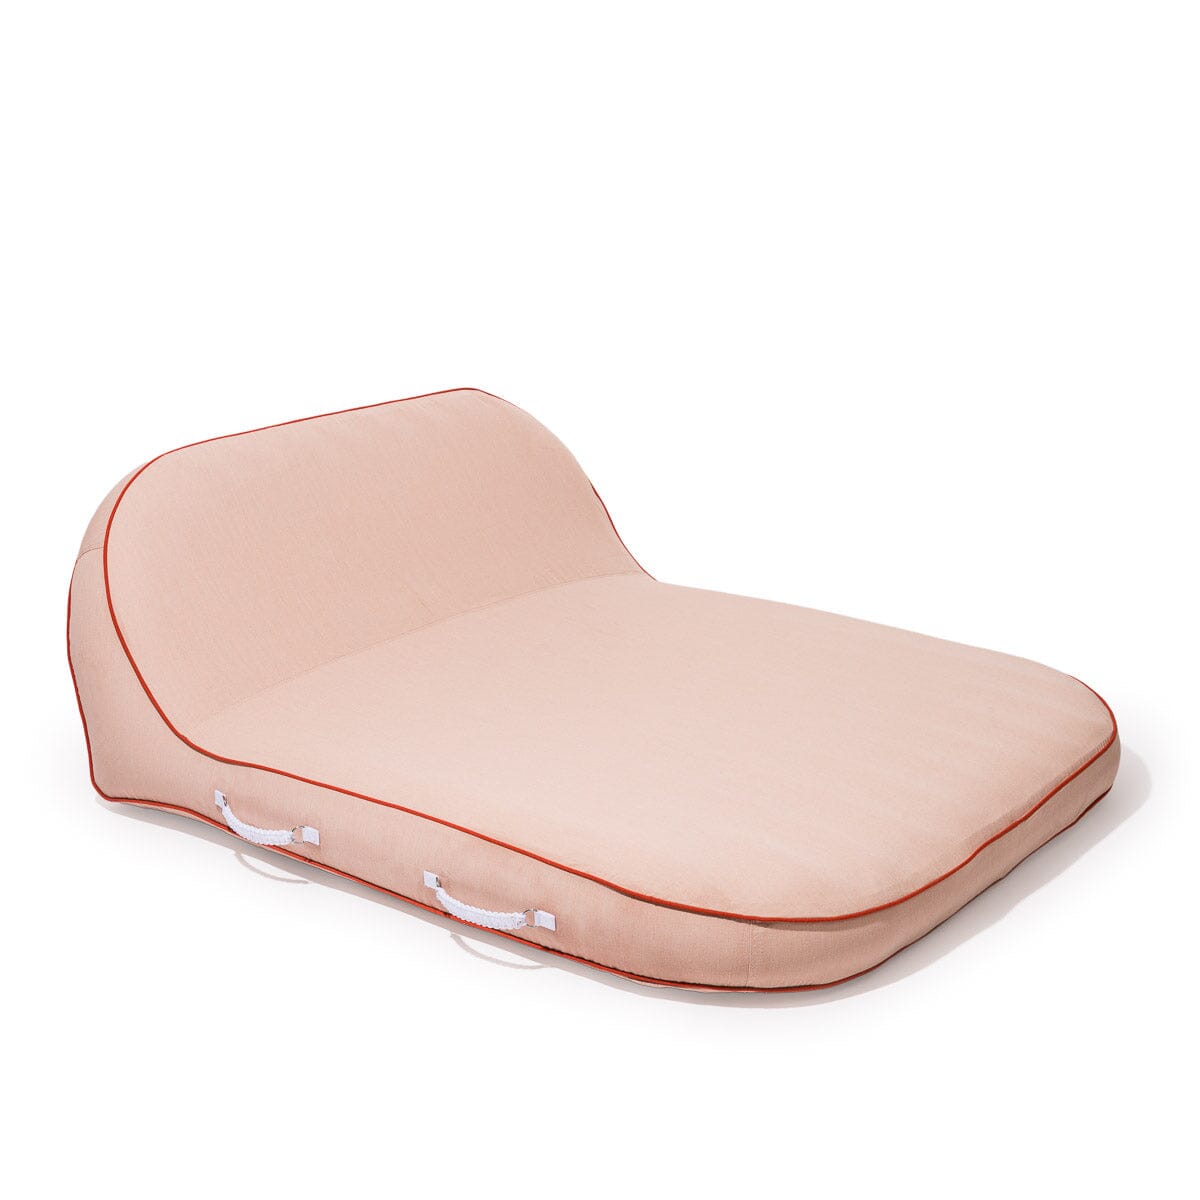 The XL Pool Lounger - Rivie Pink Pool Lounger Business & Pleasure Co Aus 